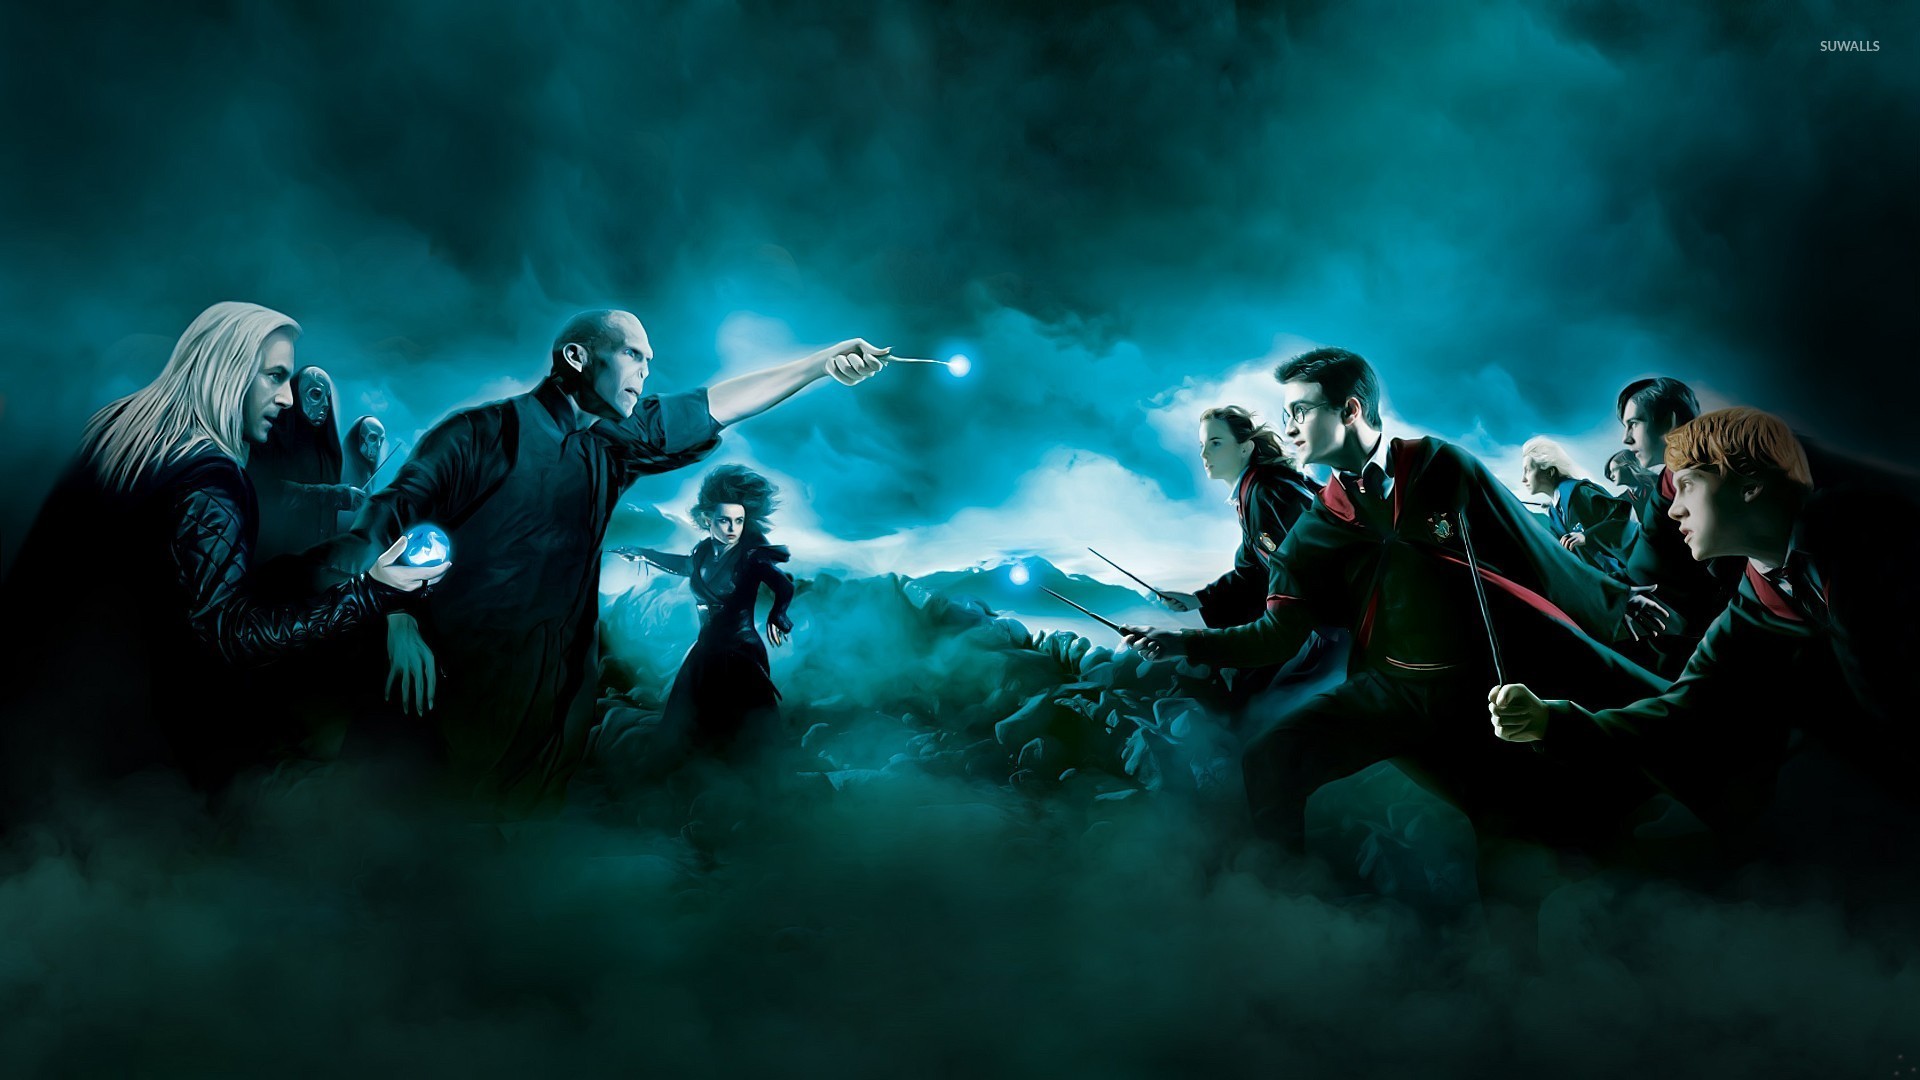 1920x1080 Harry Potter and the Deathly Hallows [2] wallpaper  jpg